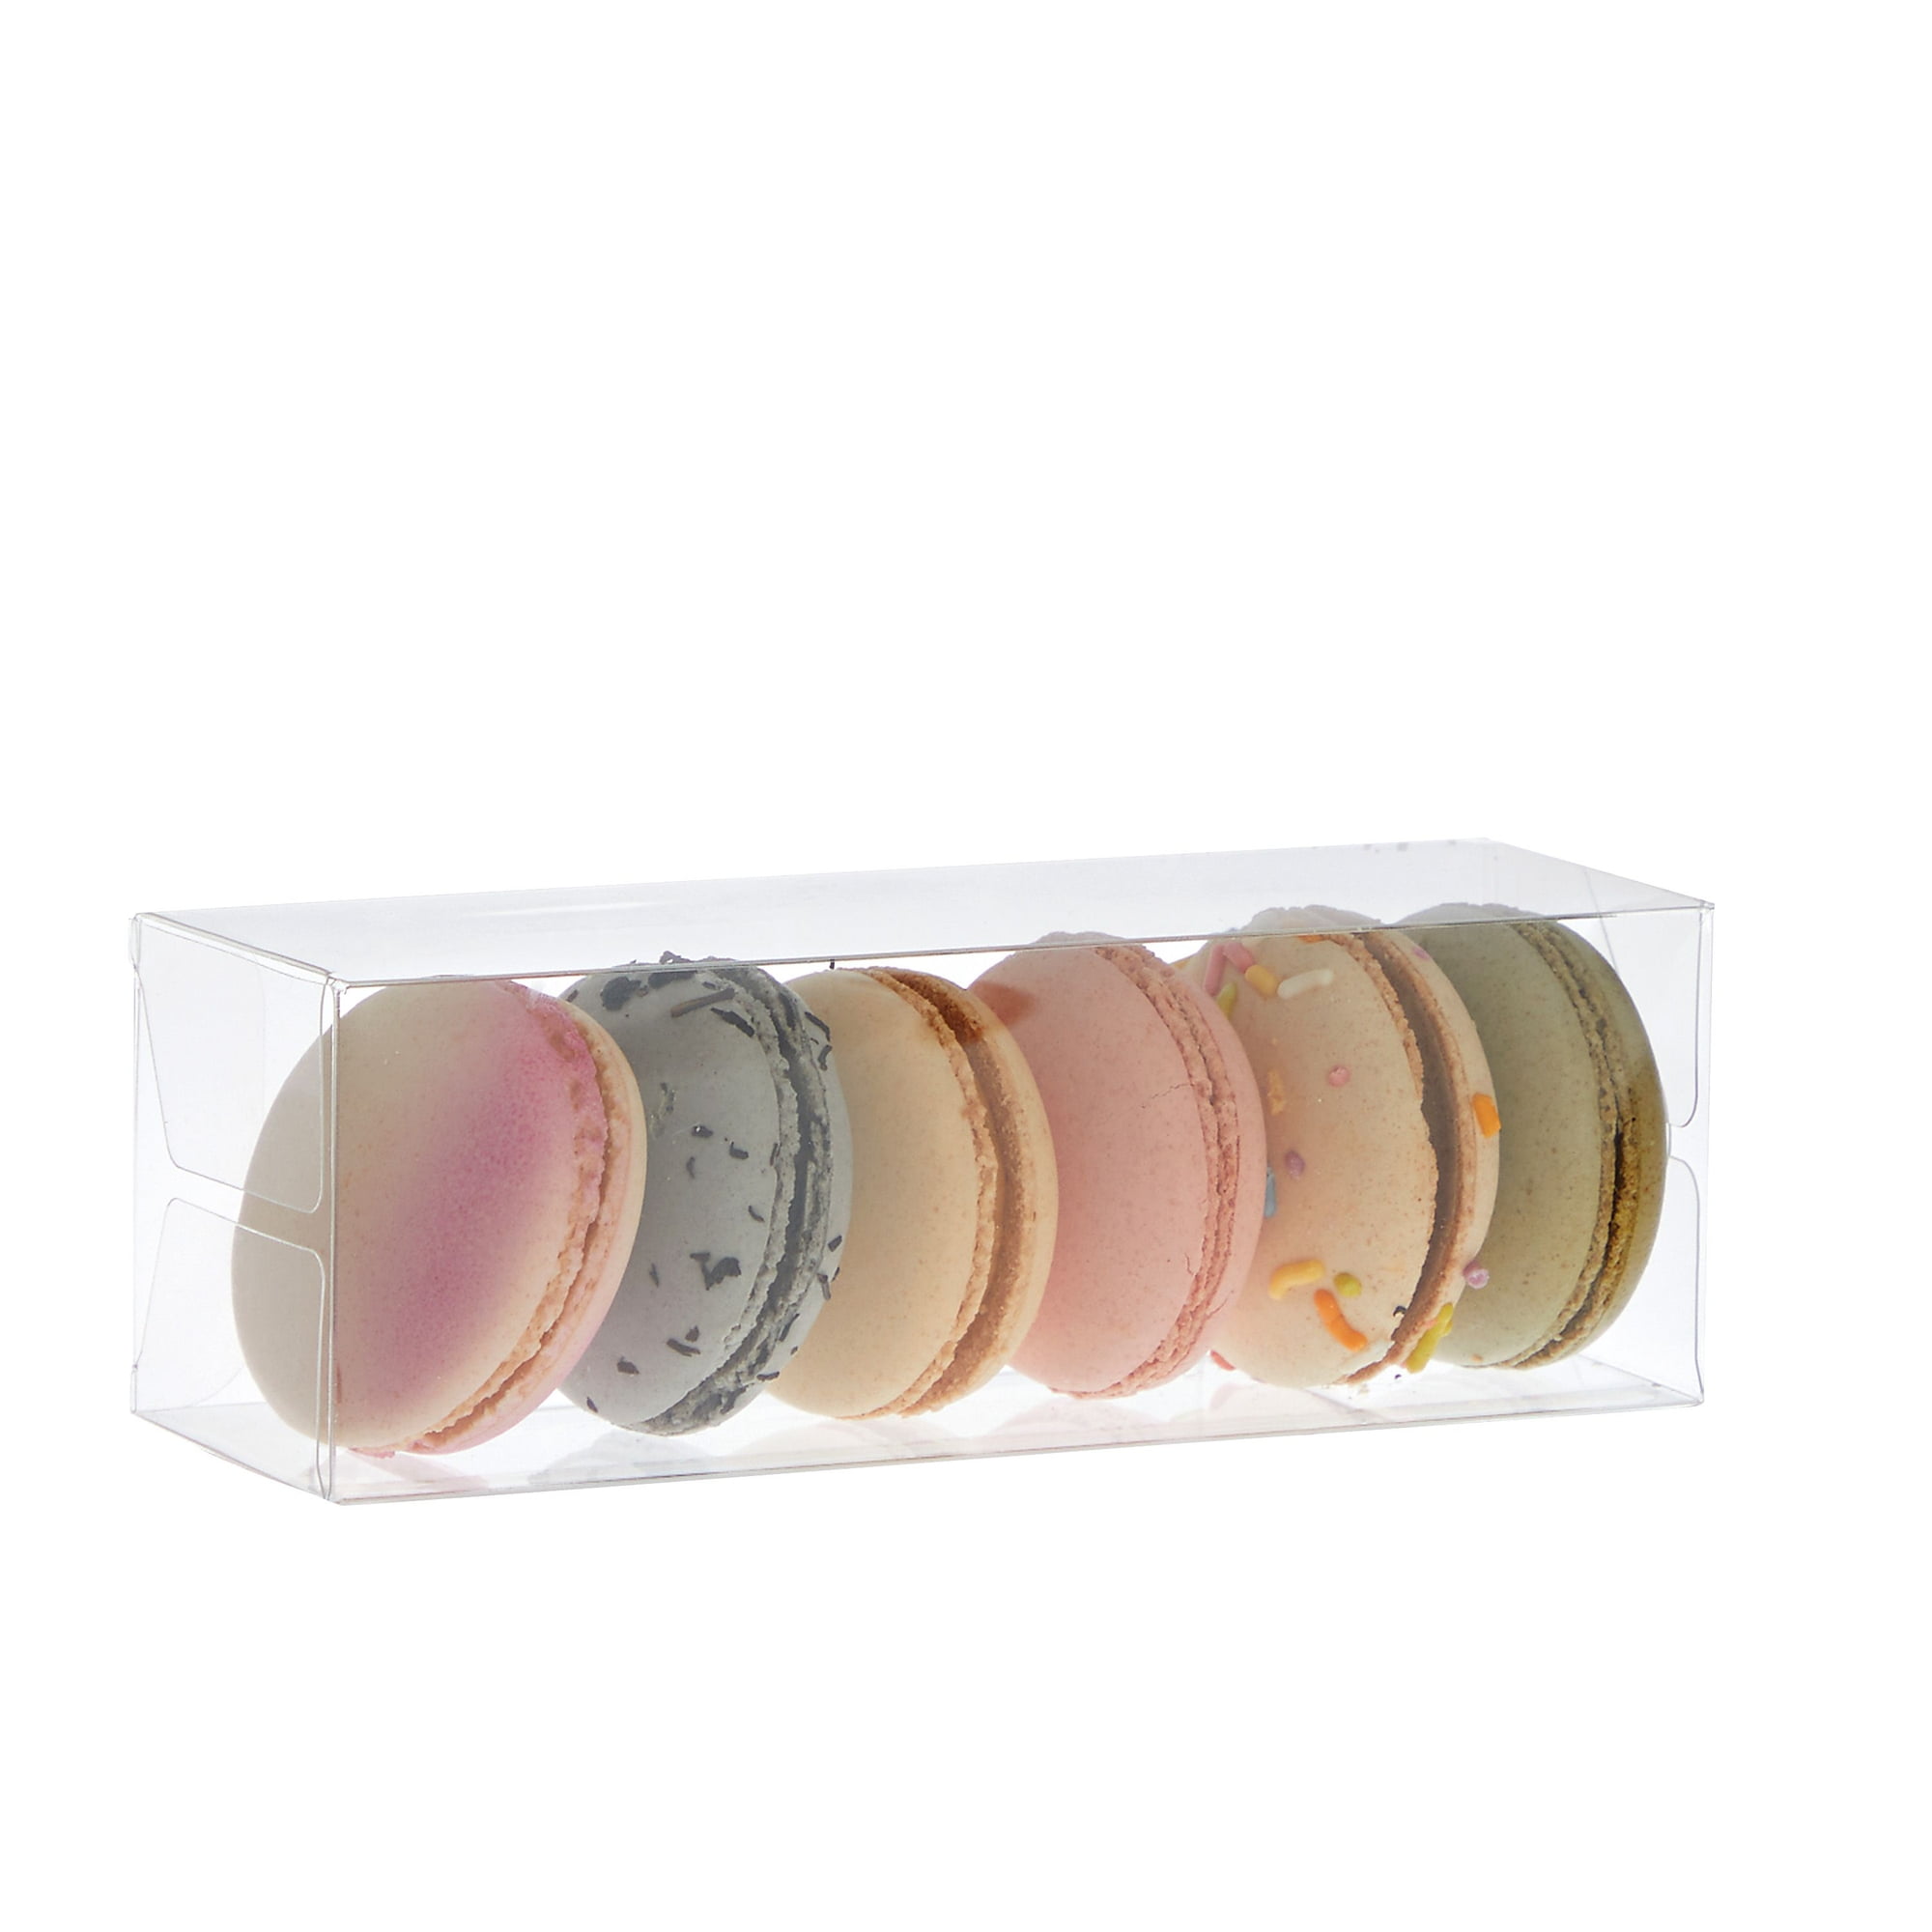 50 Pack Clear Favor Boxes, 3x3x3 Transparent Macaron Candy